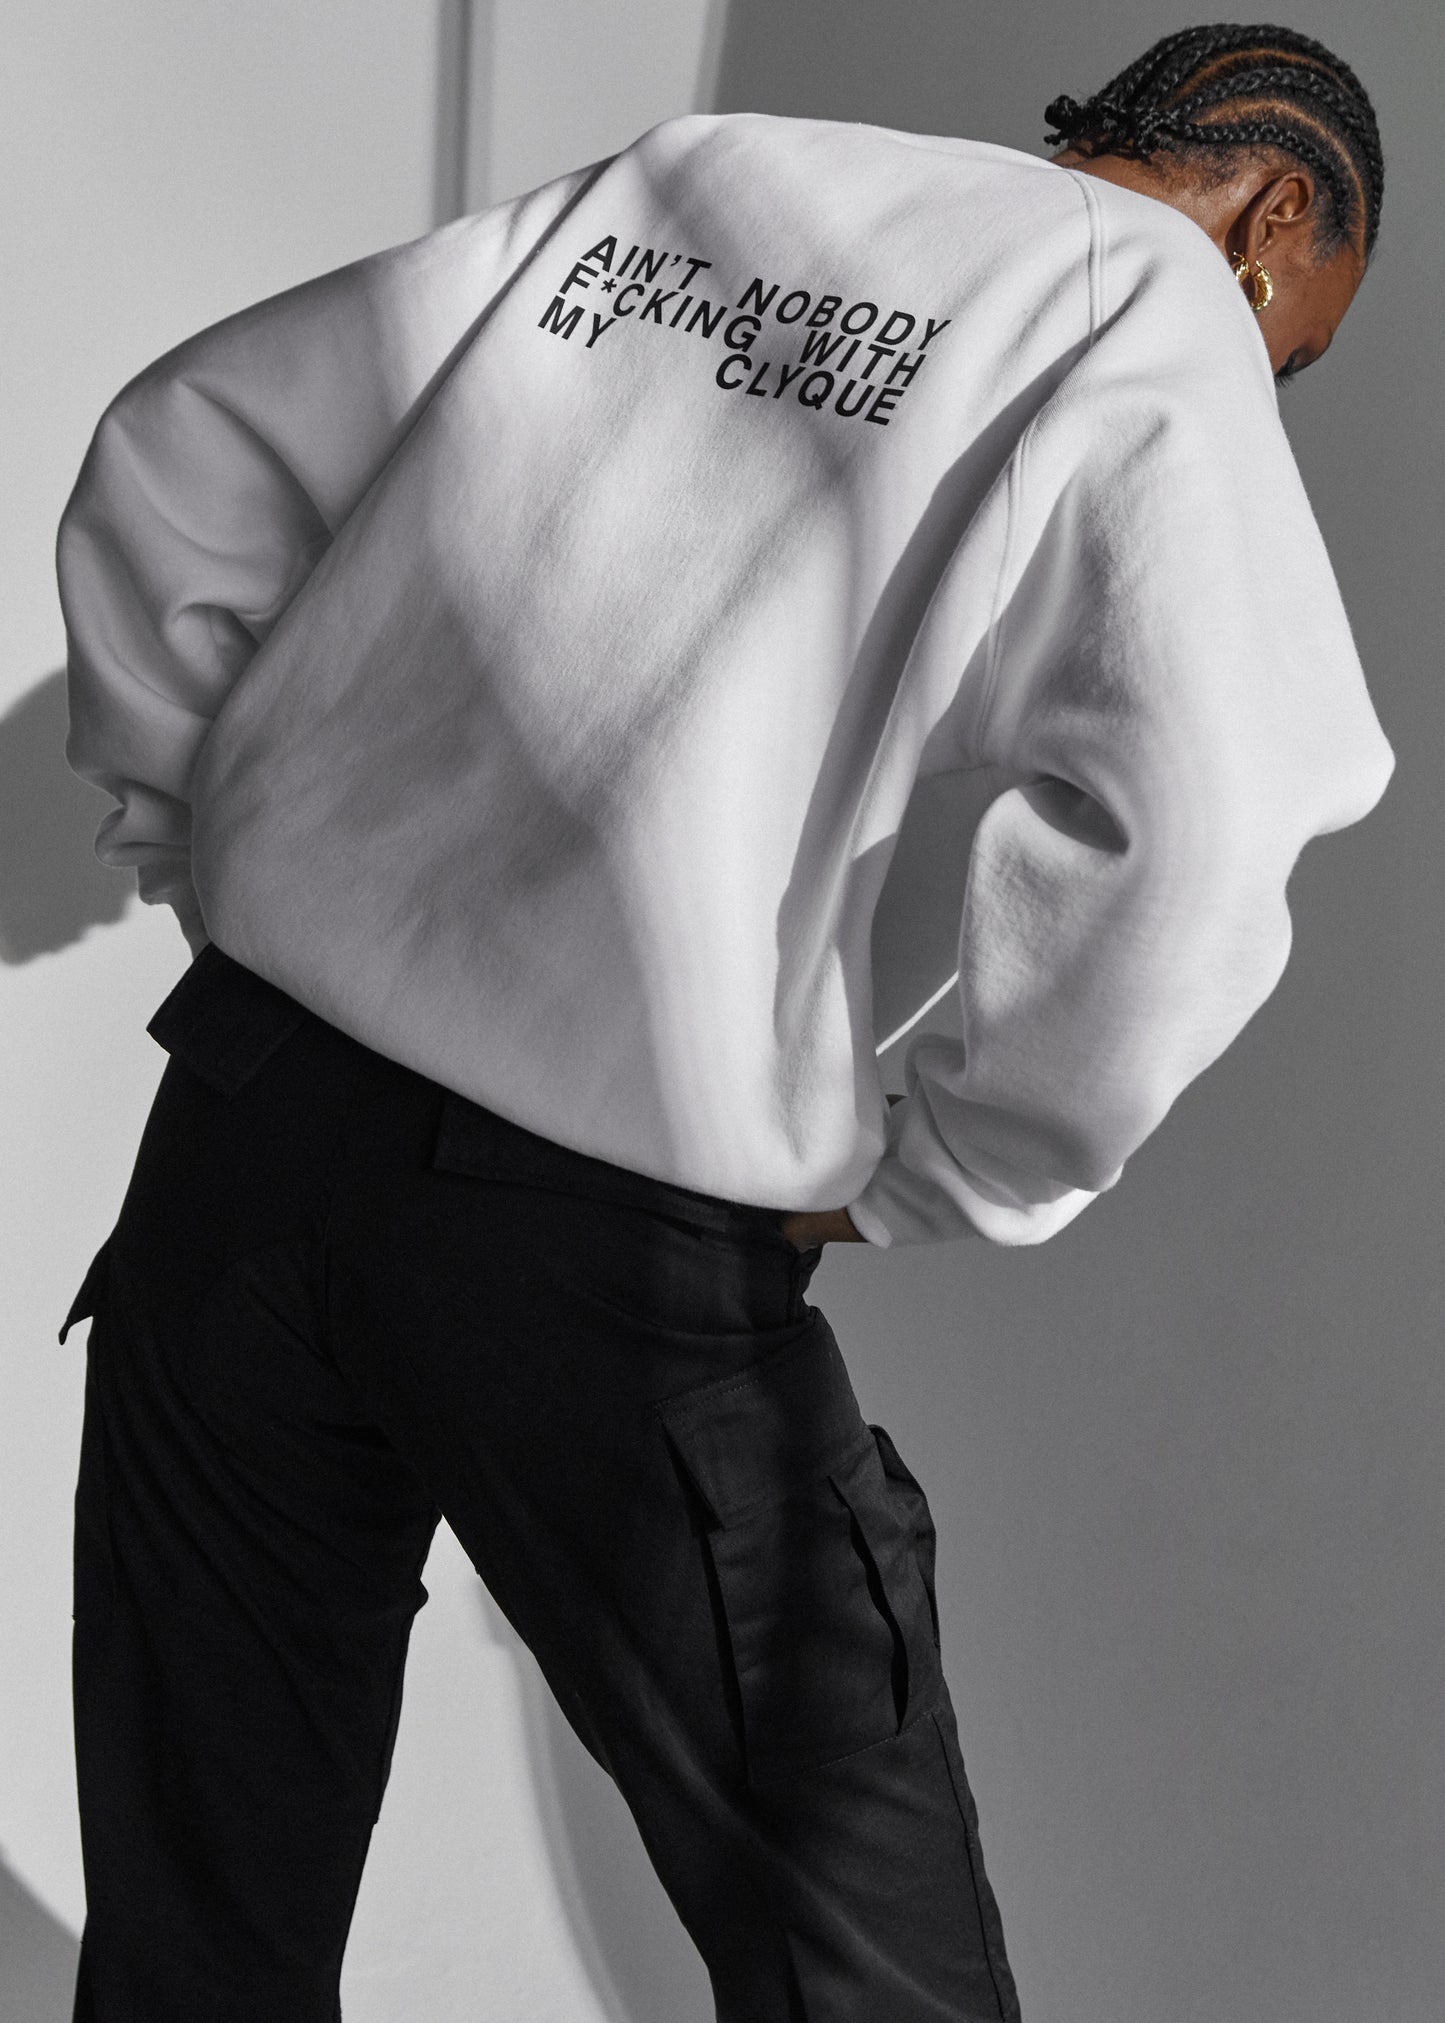 Model wearing the white over-sized sweatshirt by Clyque with a graphic on the back .